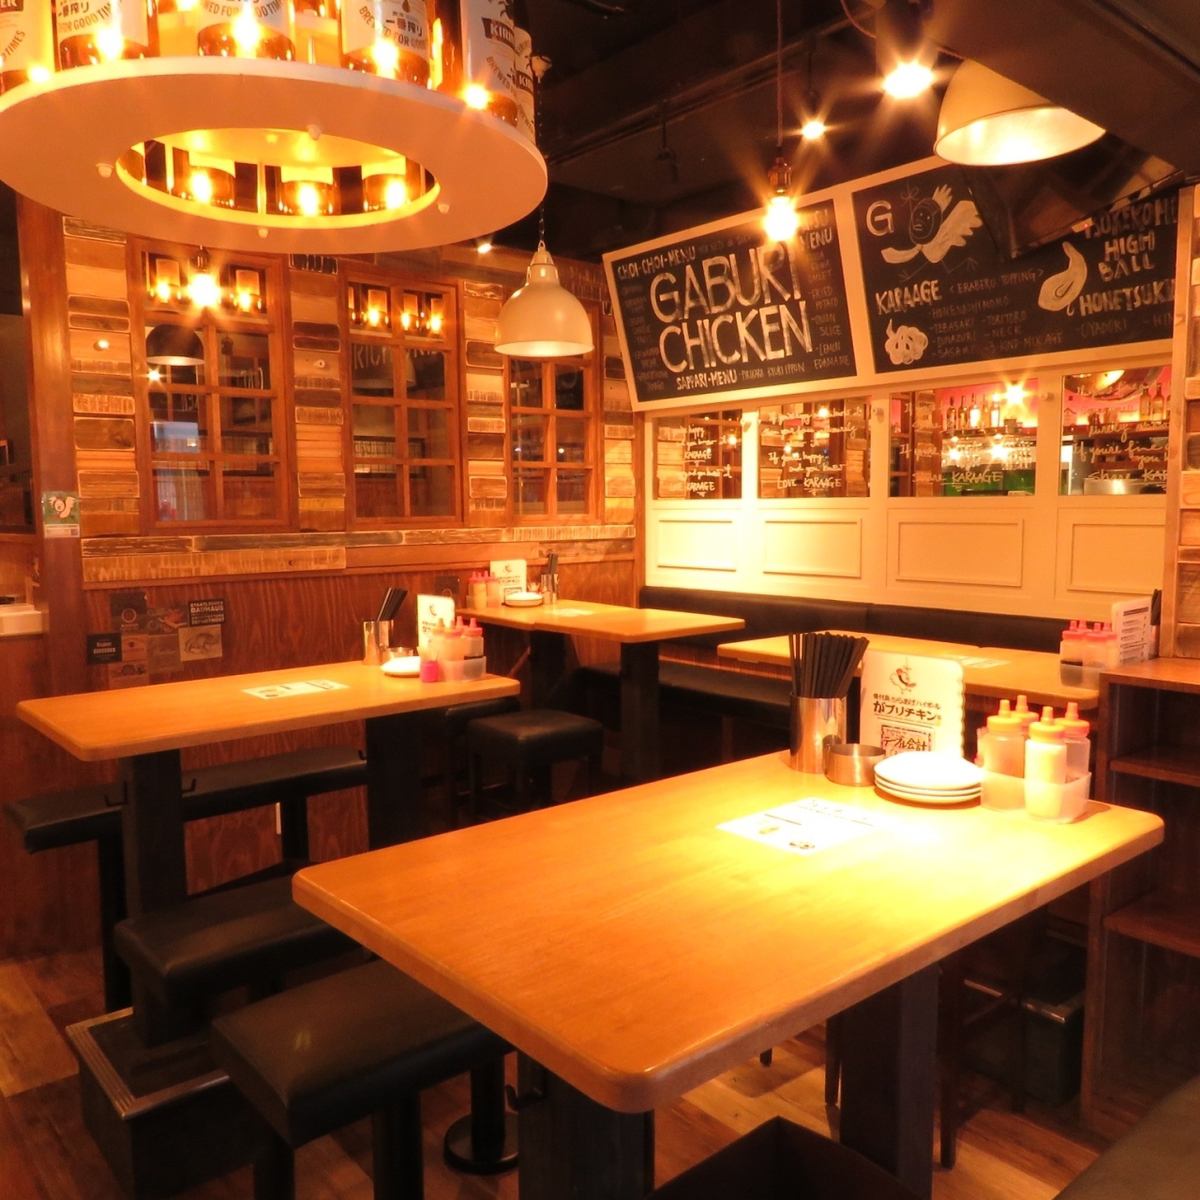 A spacious space with a cute interior ★ For joint parties, girls-only gatherings, and birthday parties ◎